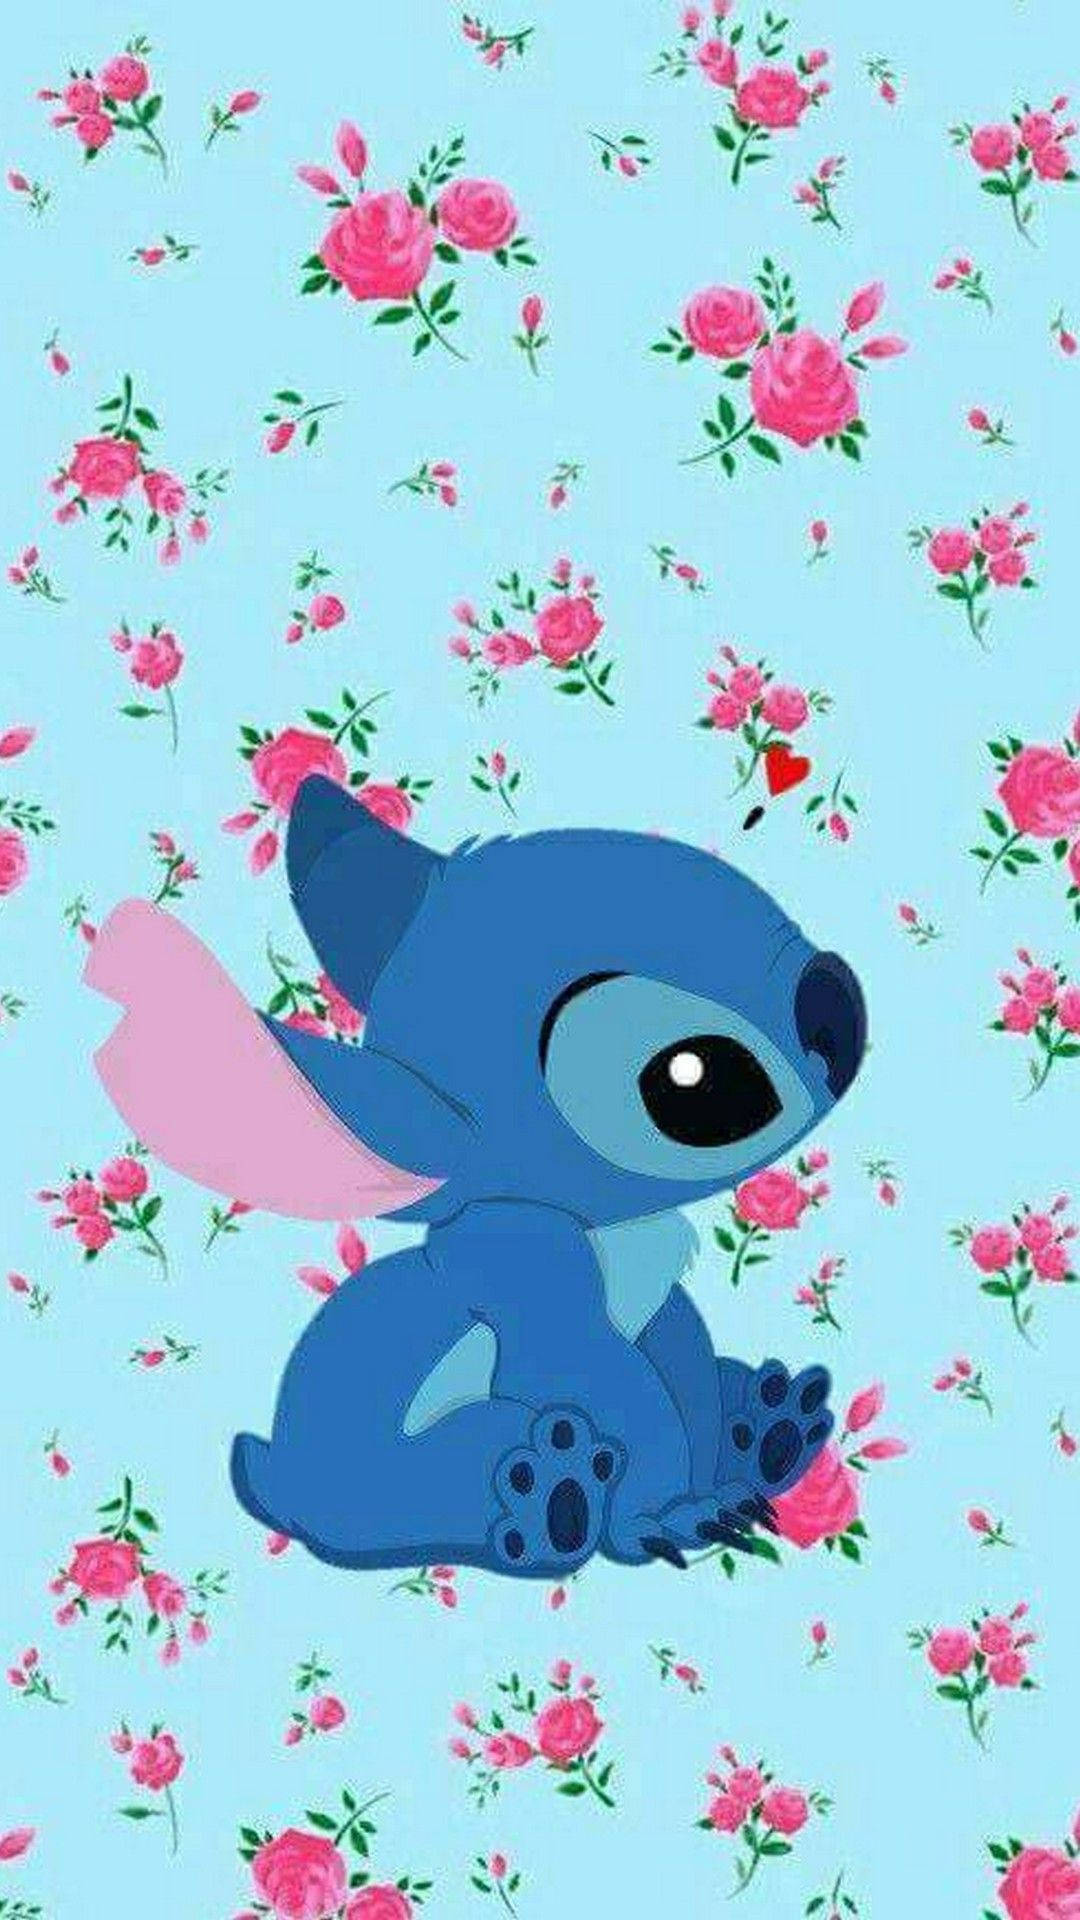 Stitch With Pink Roses wallpaper.